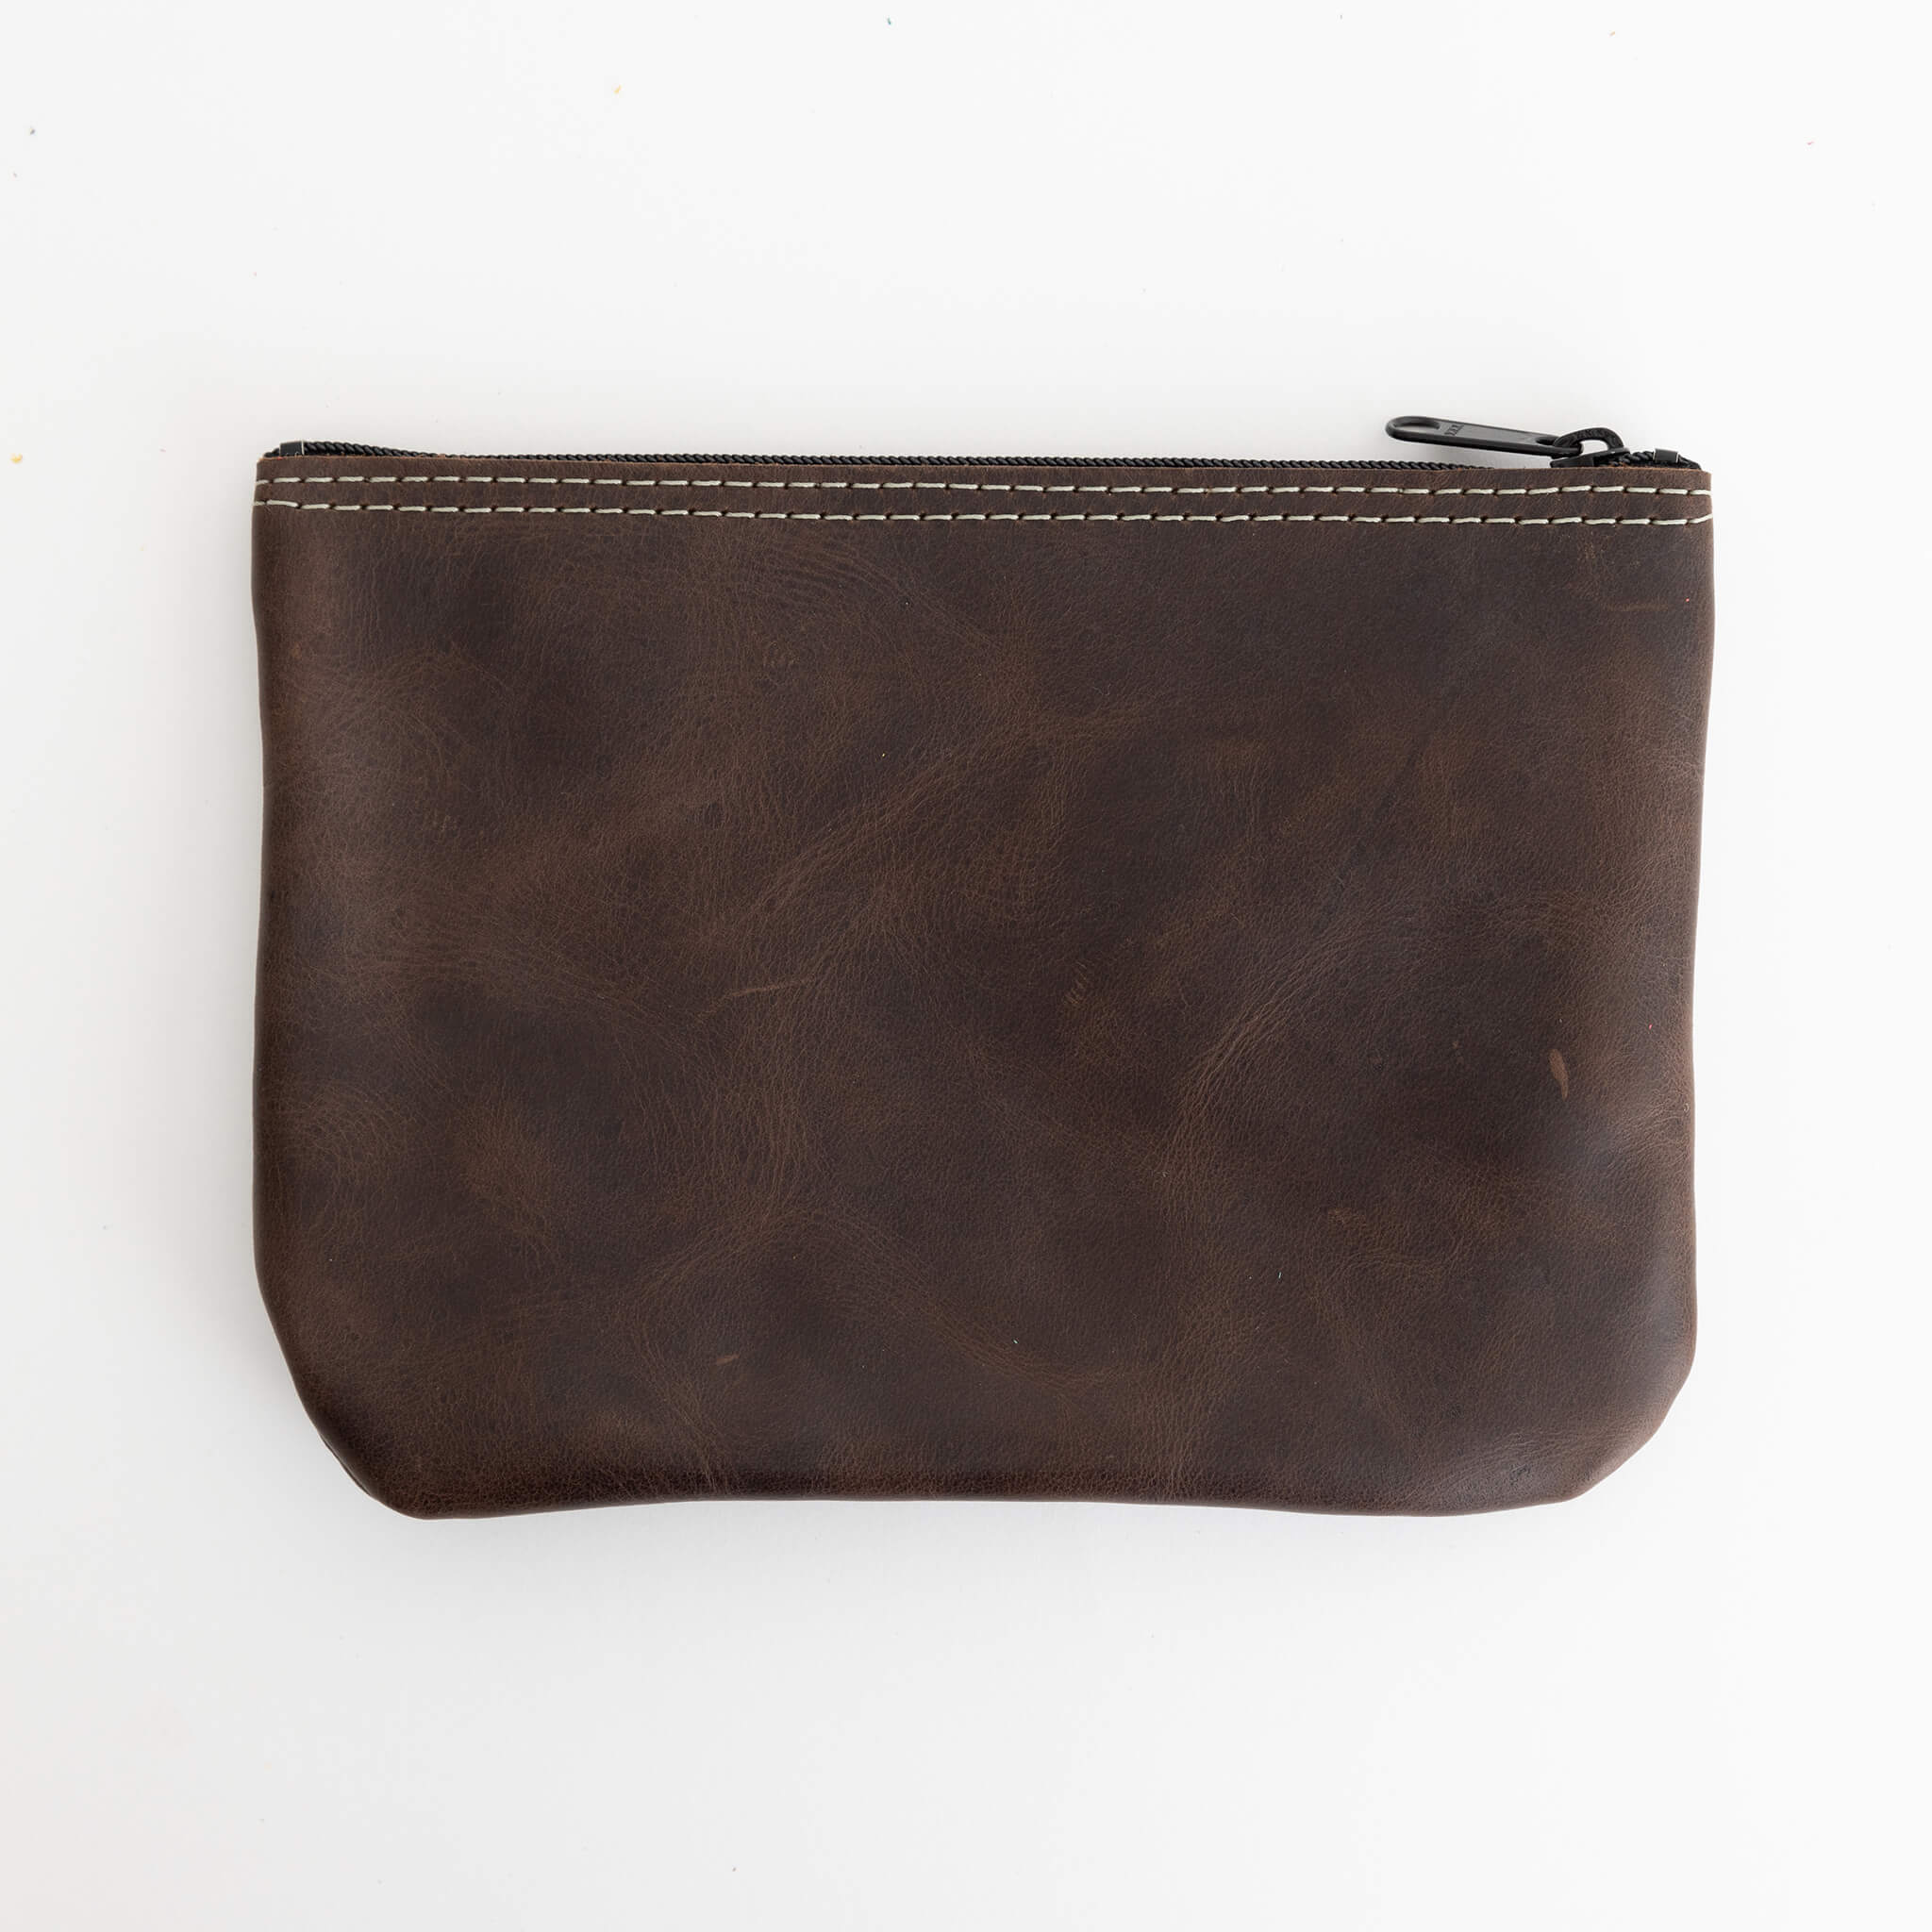 perfect pouch unisex zipper bag - handmade leather - chocolate front view